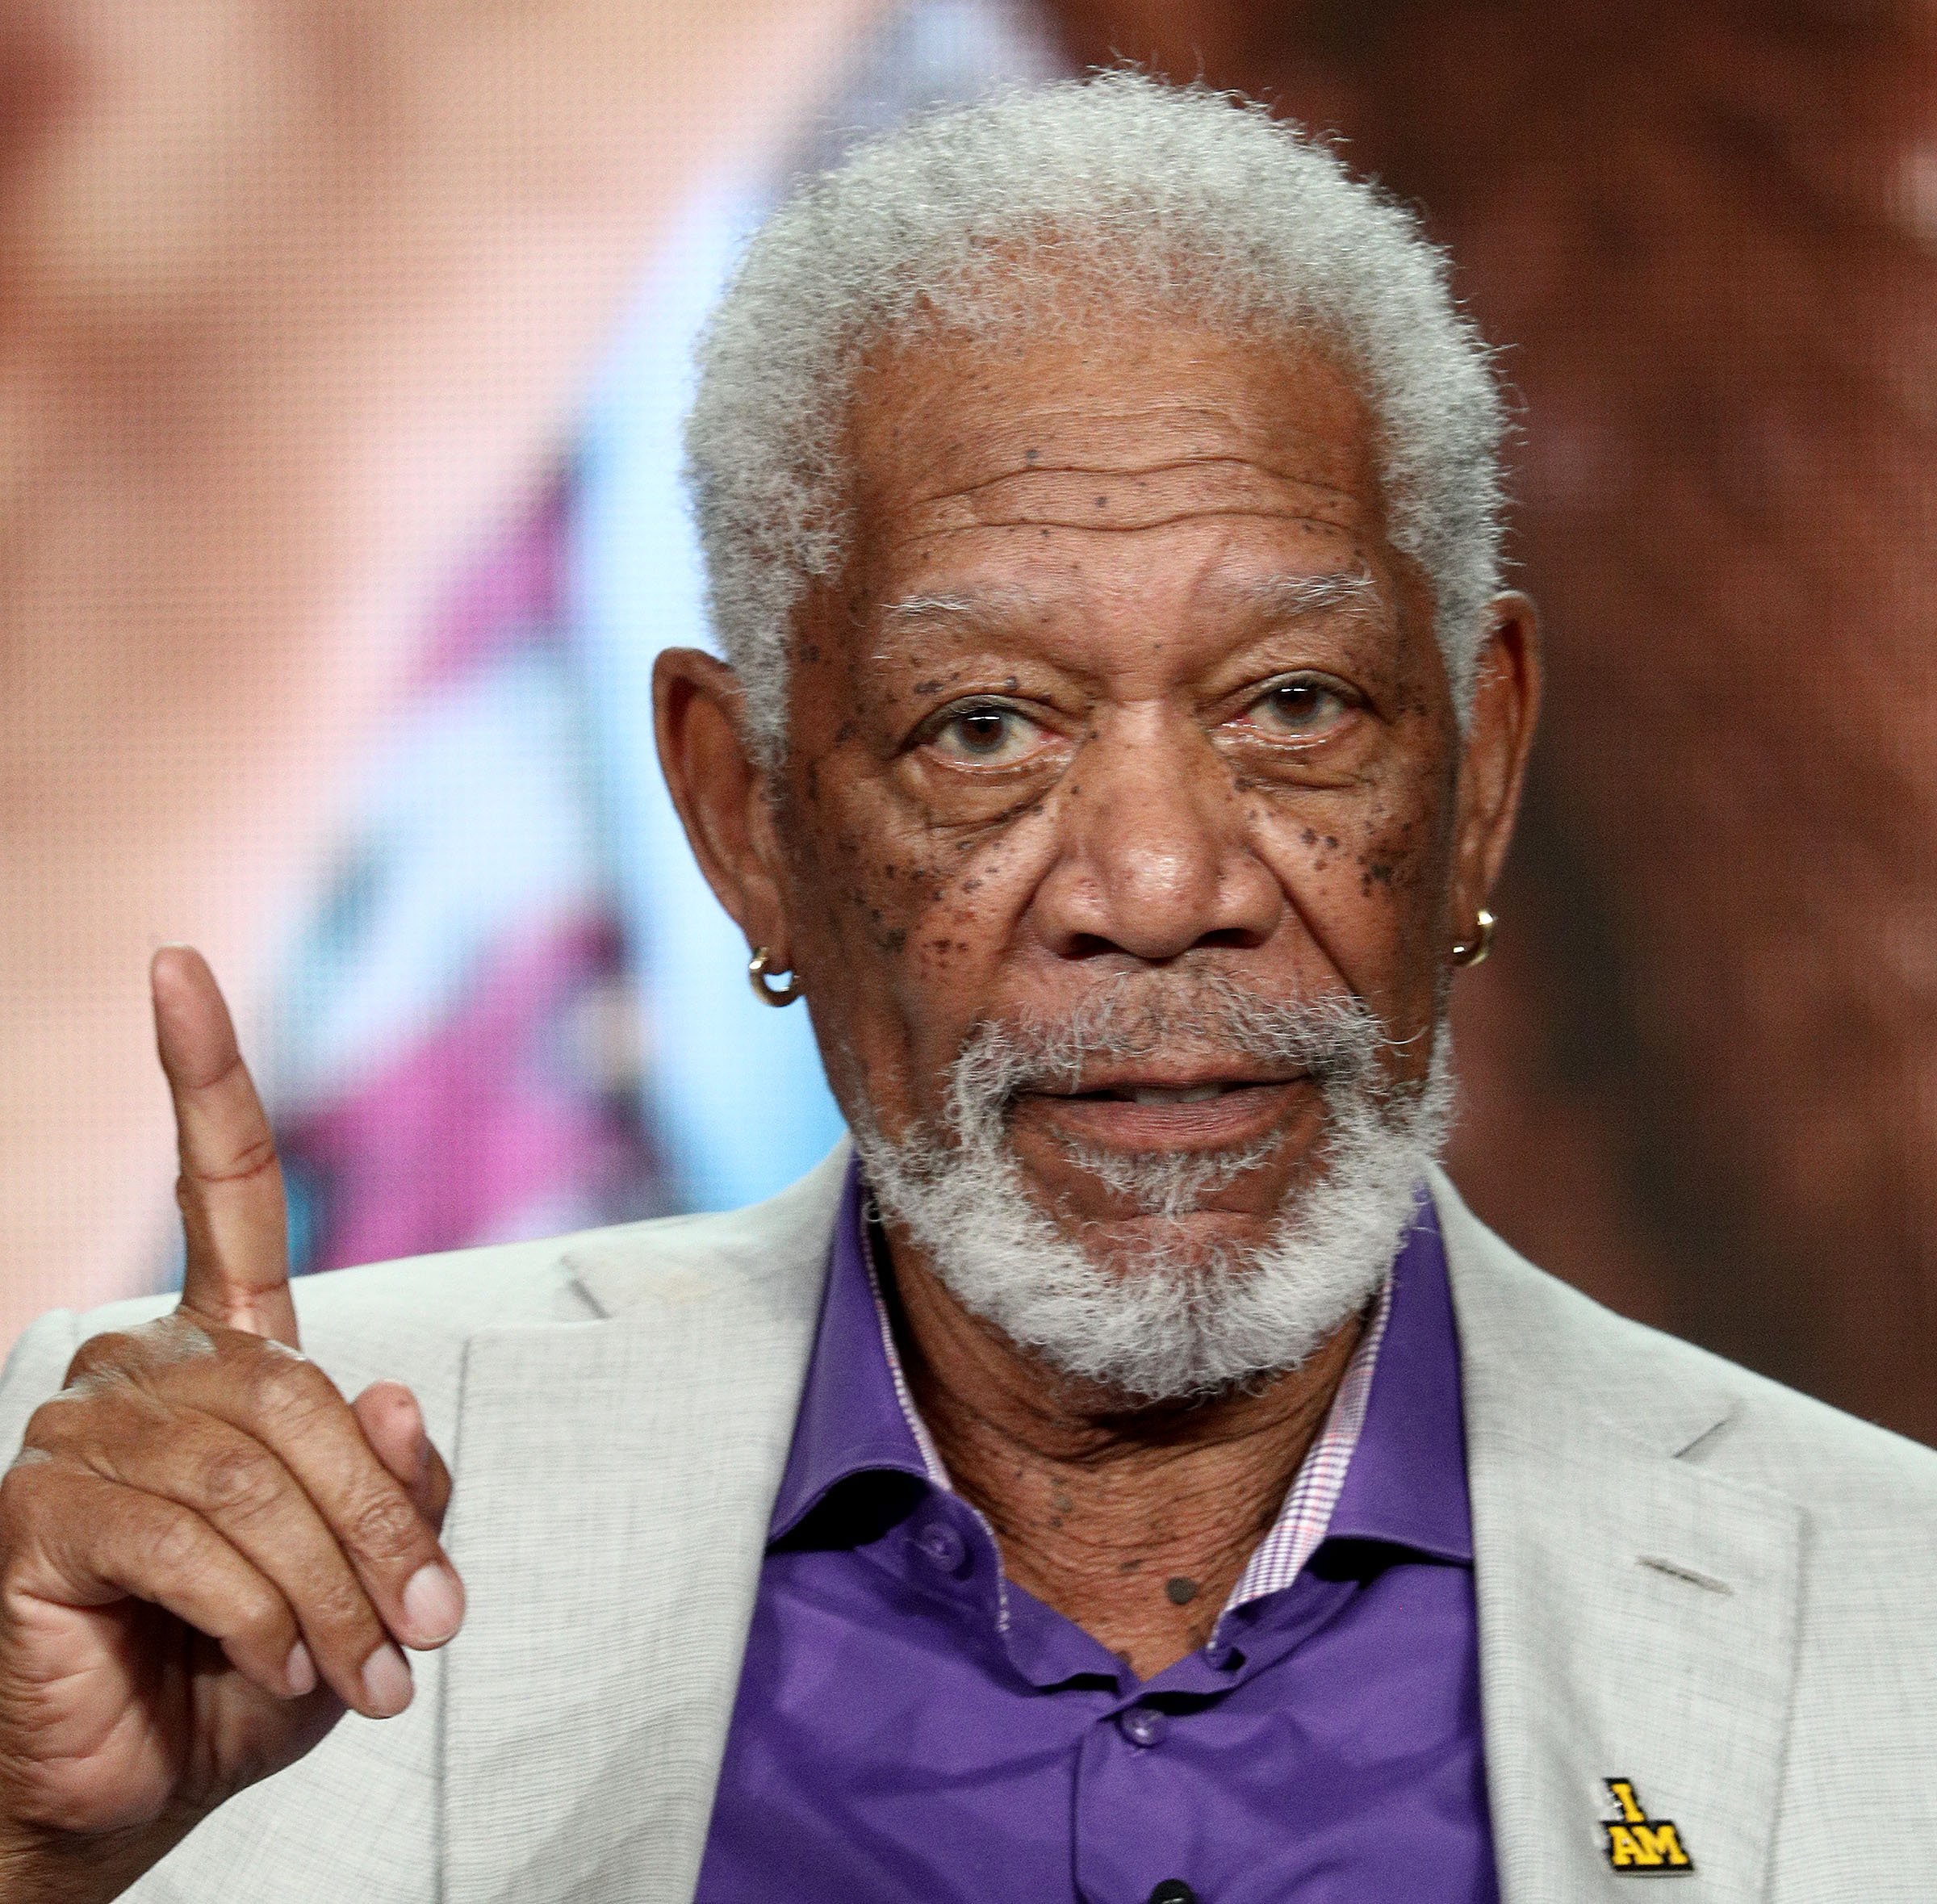 Morgan Freeman during the National Geographic segment of the 2019 Winter Television Critics Association Press Tour in LA on Feb. 10, 2019. | Photo: Getty Images